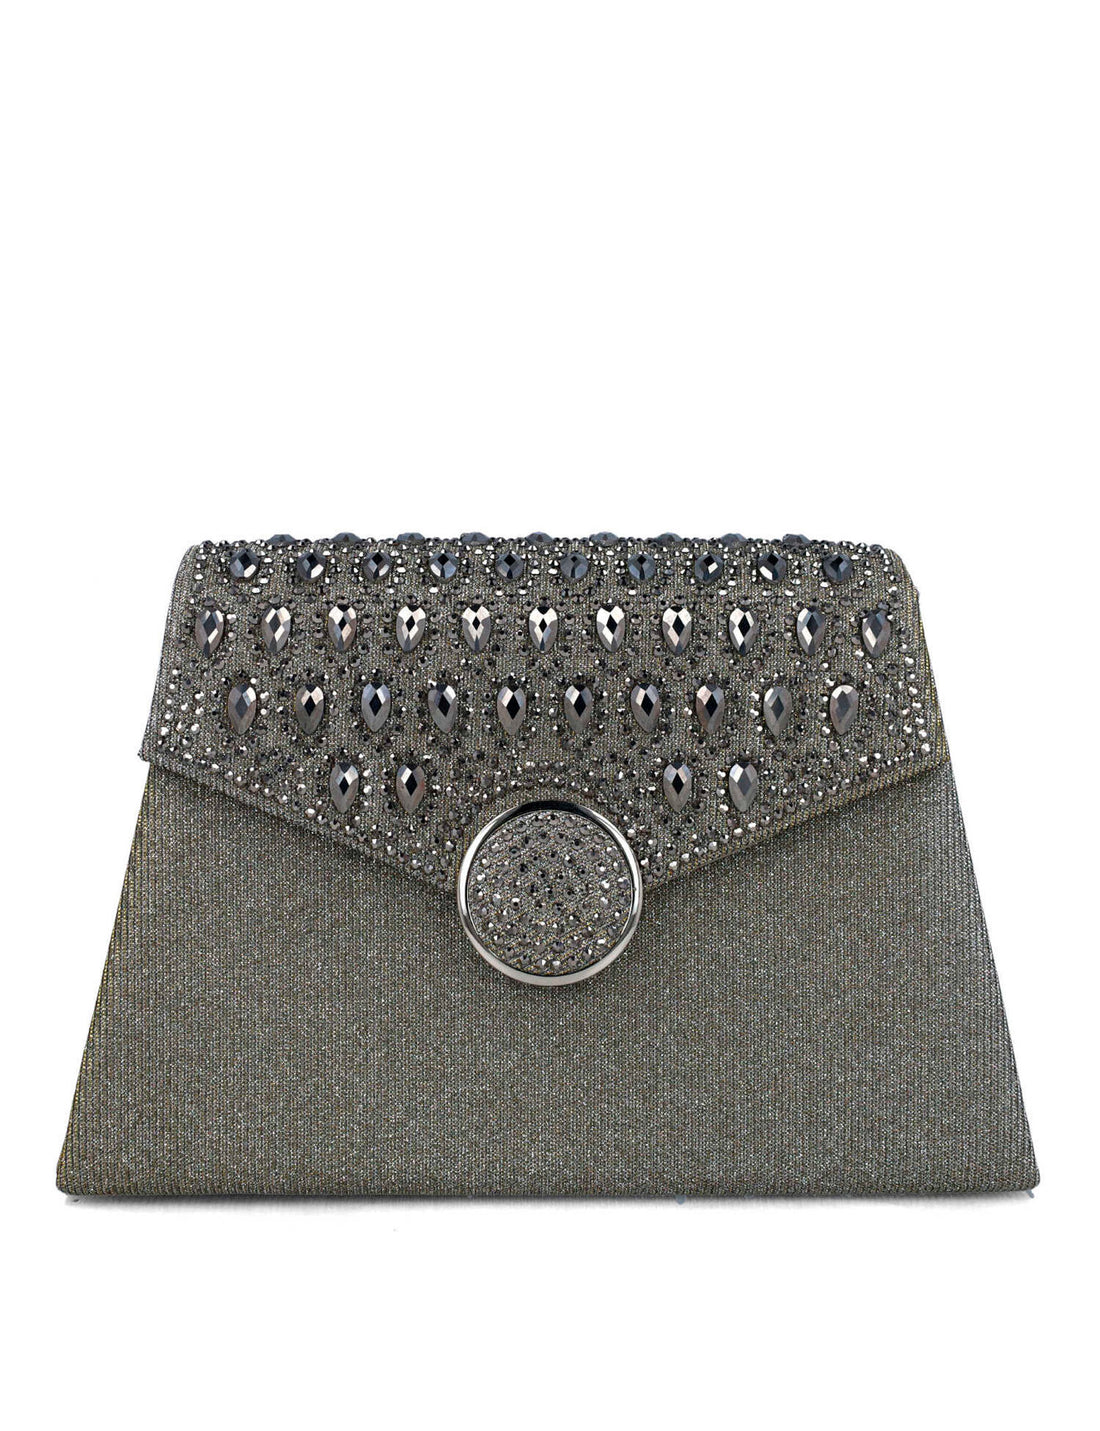 Grey Clutch With Embellished Flap_85636_71_01